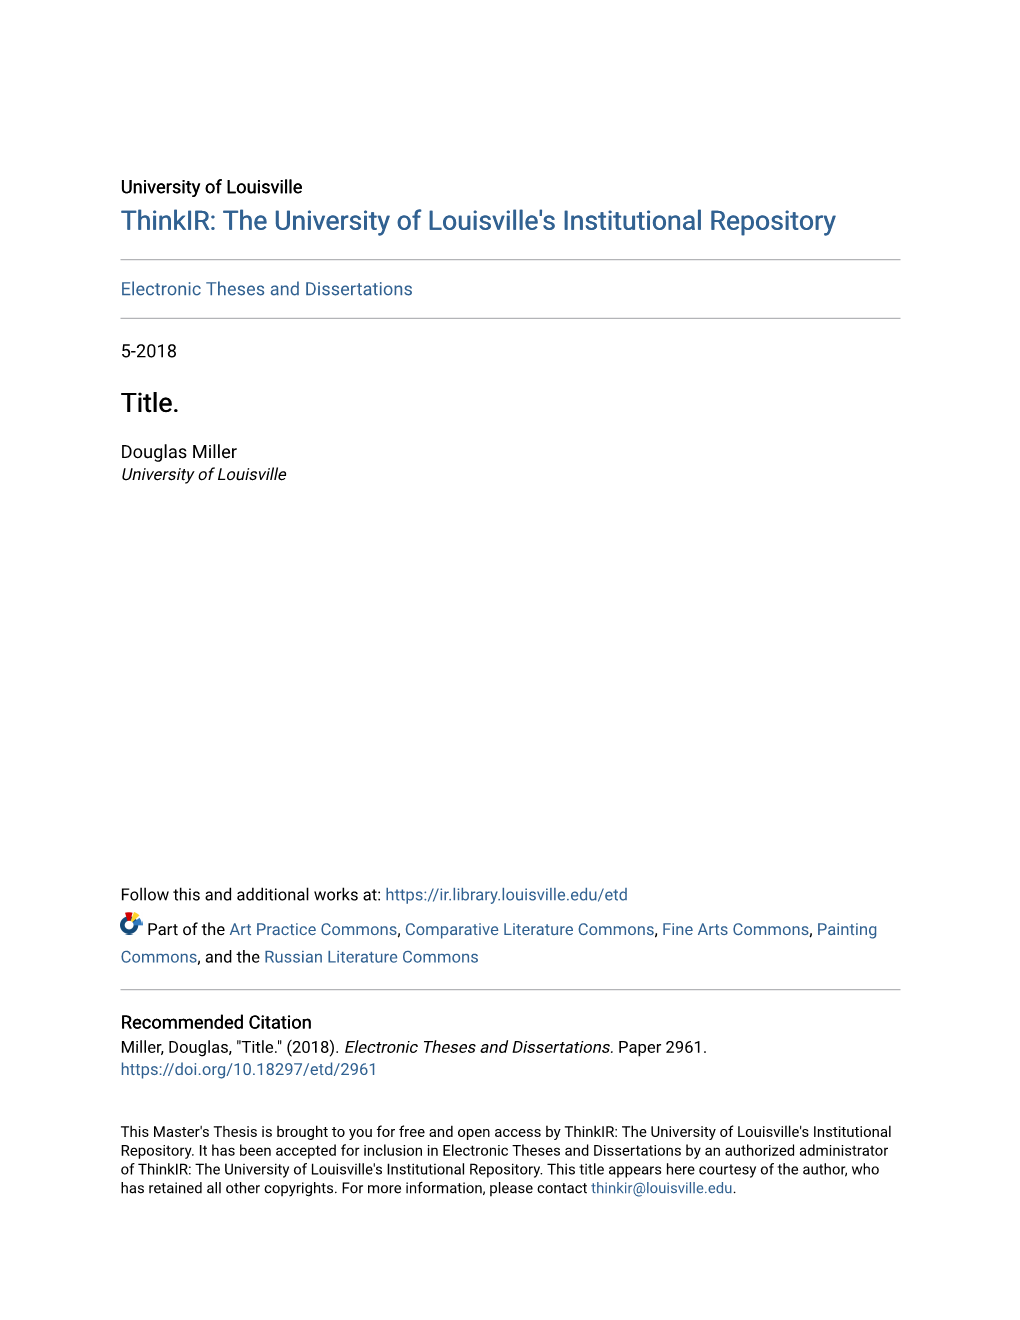 The University of Louisville's Institutional Repository Title